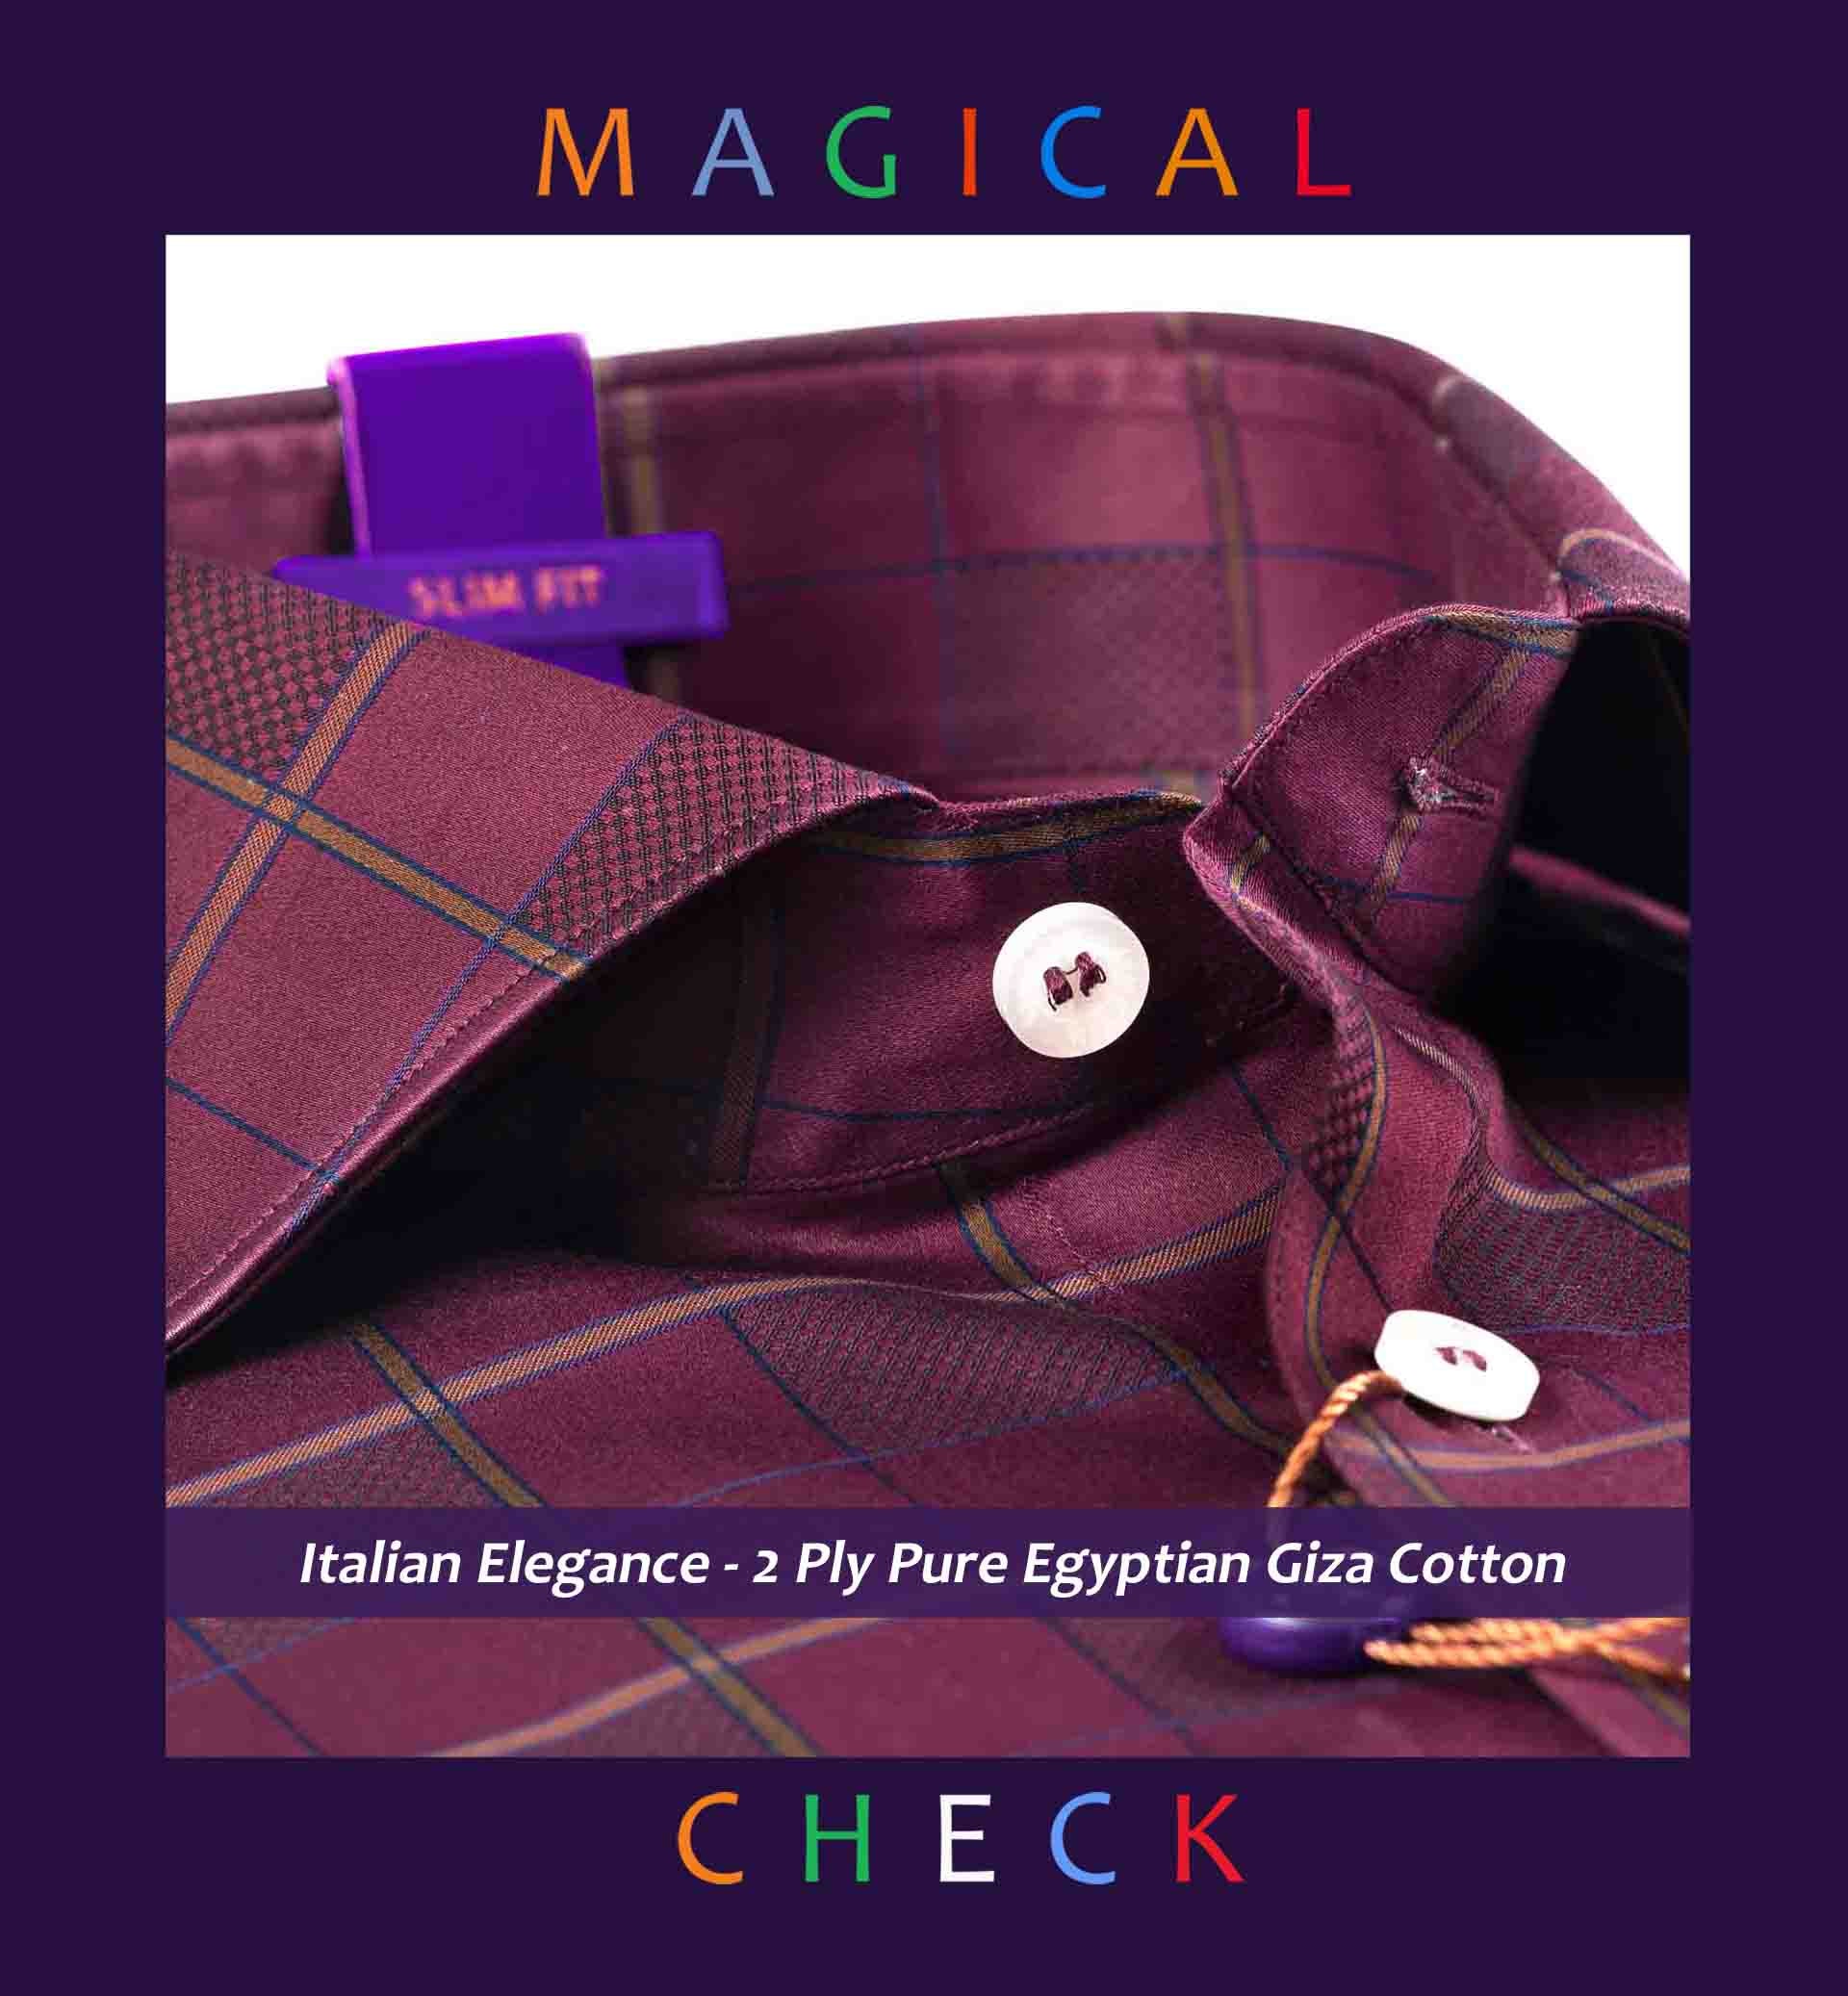 Pablo- Burgundy & Olive Magical Check- 2 Ply Pure Egyptian Giza Cotton